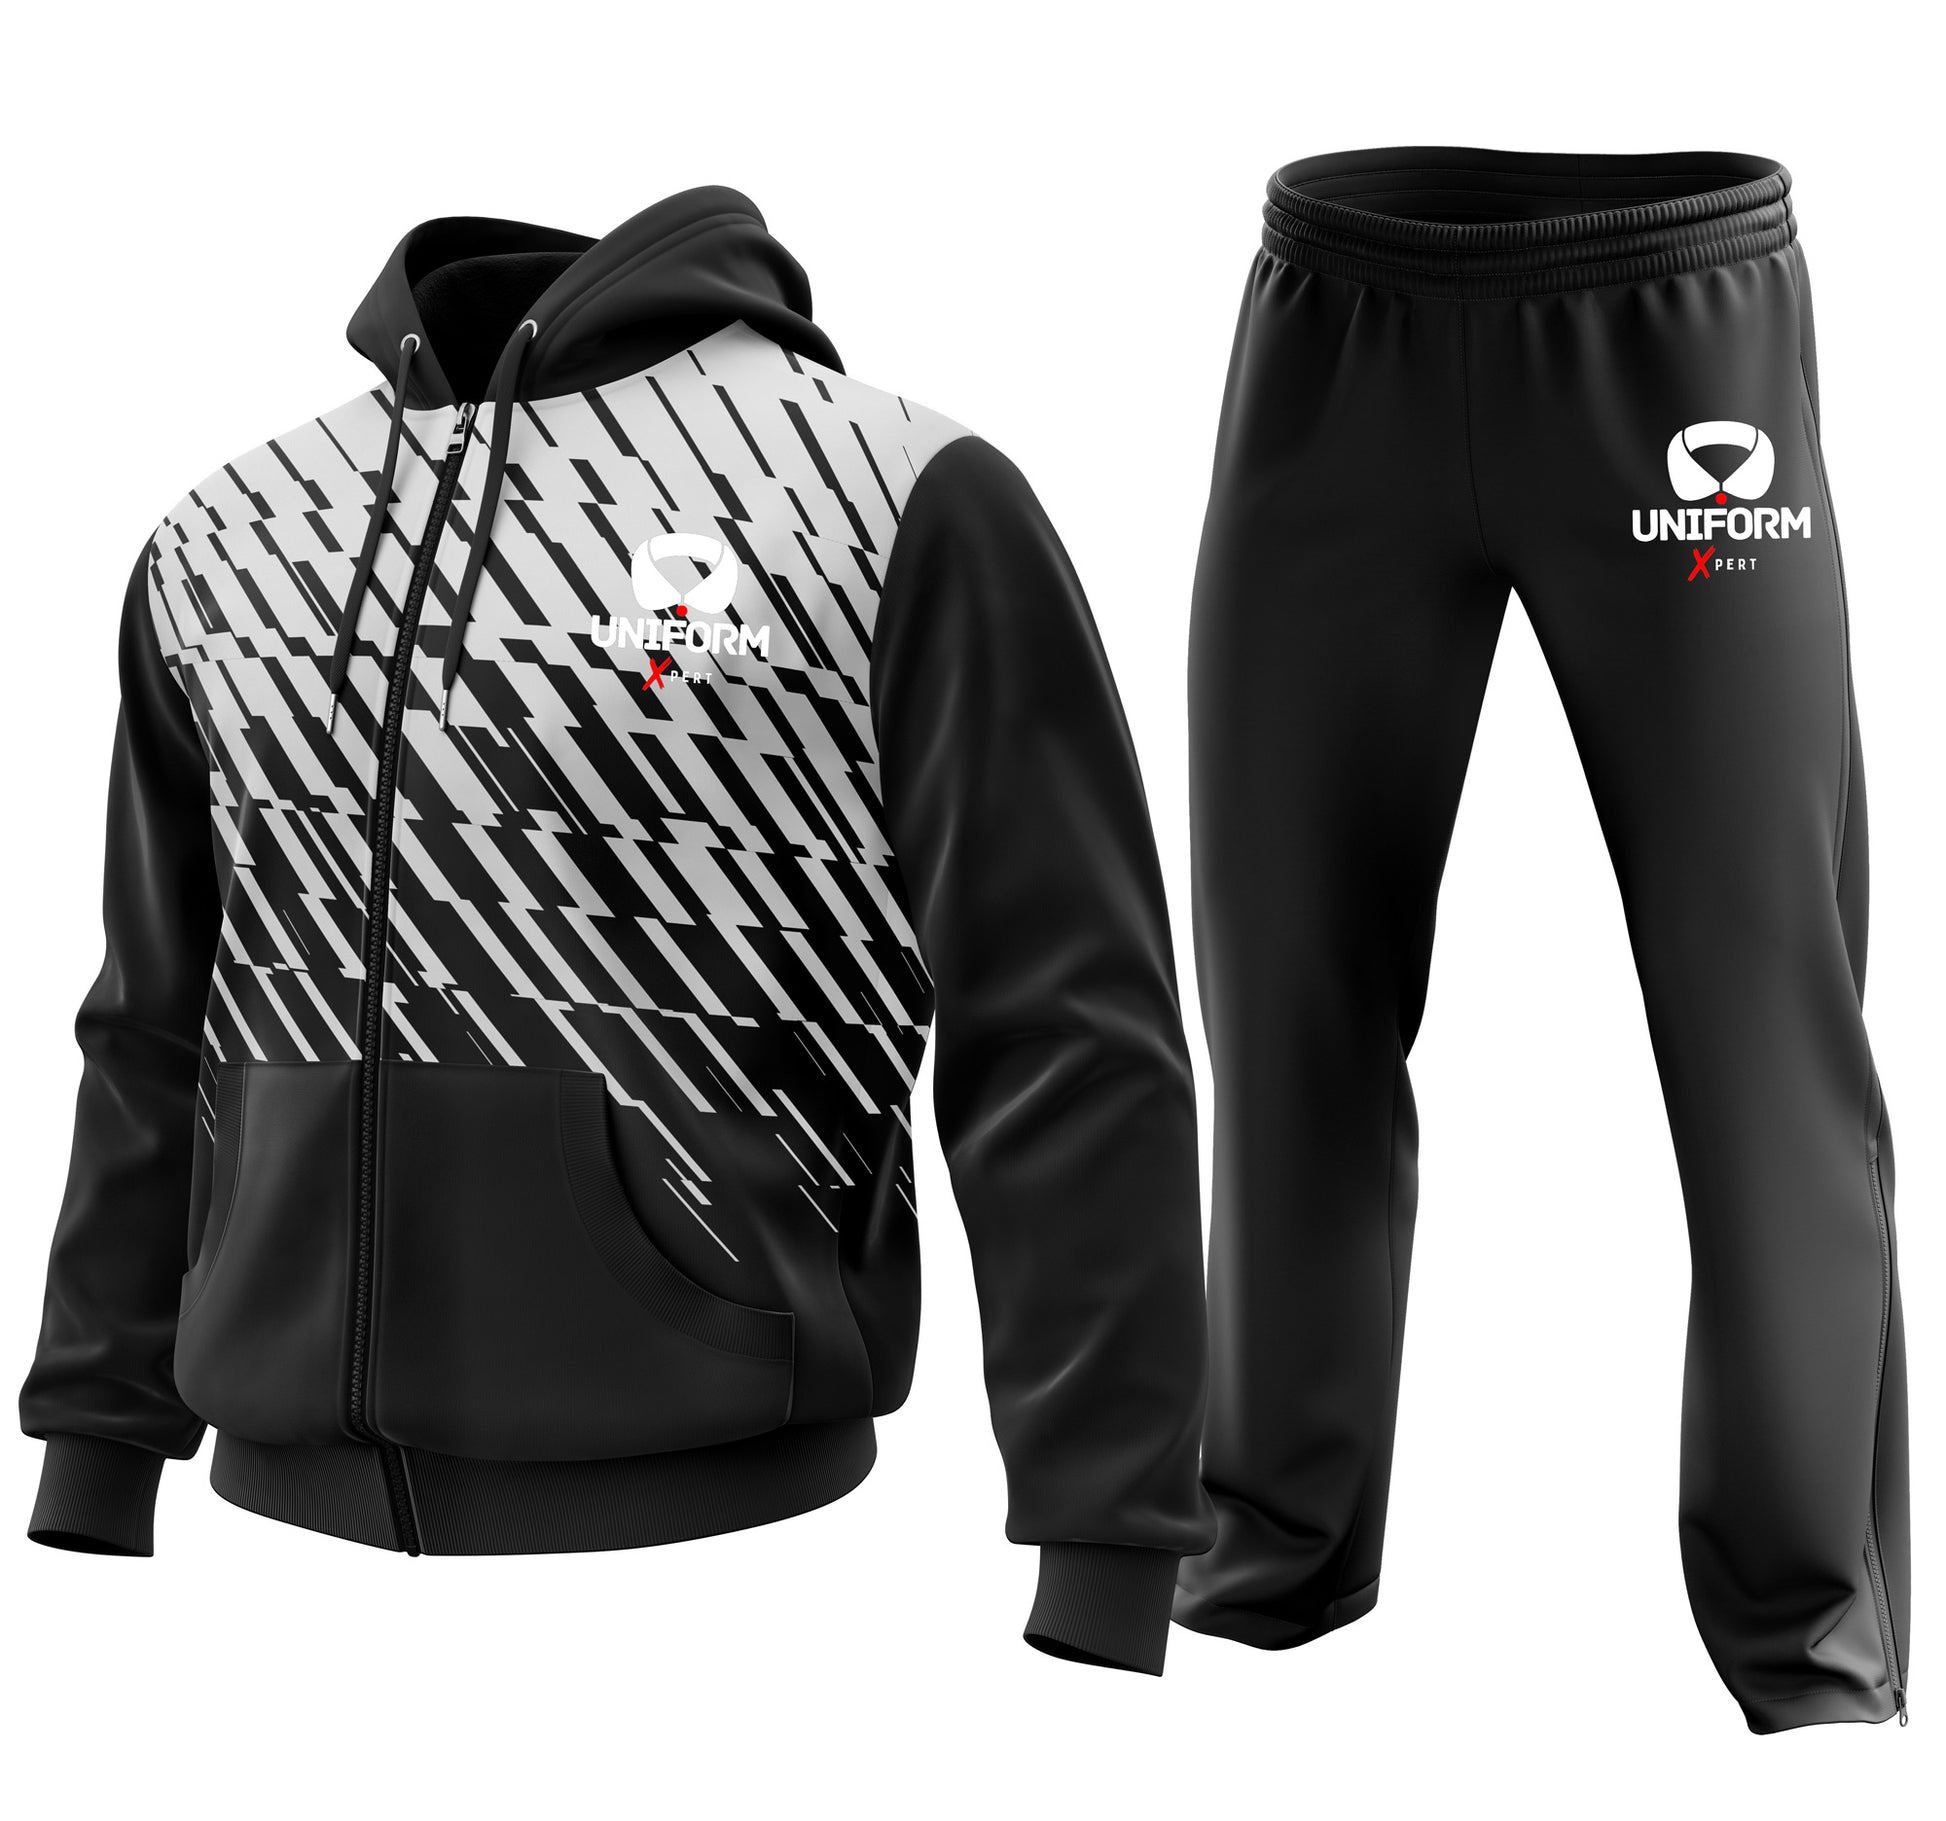 This image depicts a men's track suit. It is predominantly black with white stripes along the sides. The track suit includes features such as zippered pockets, an elastic waistband, and adjustable cuffs. It is suitable for various activities like running, gym workouts, and other sports.